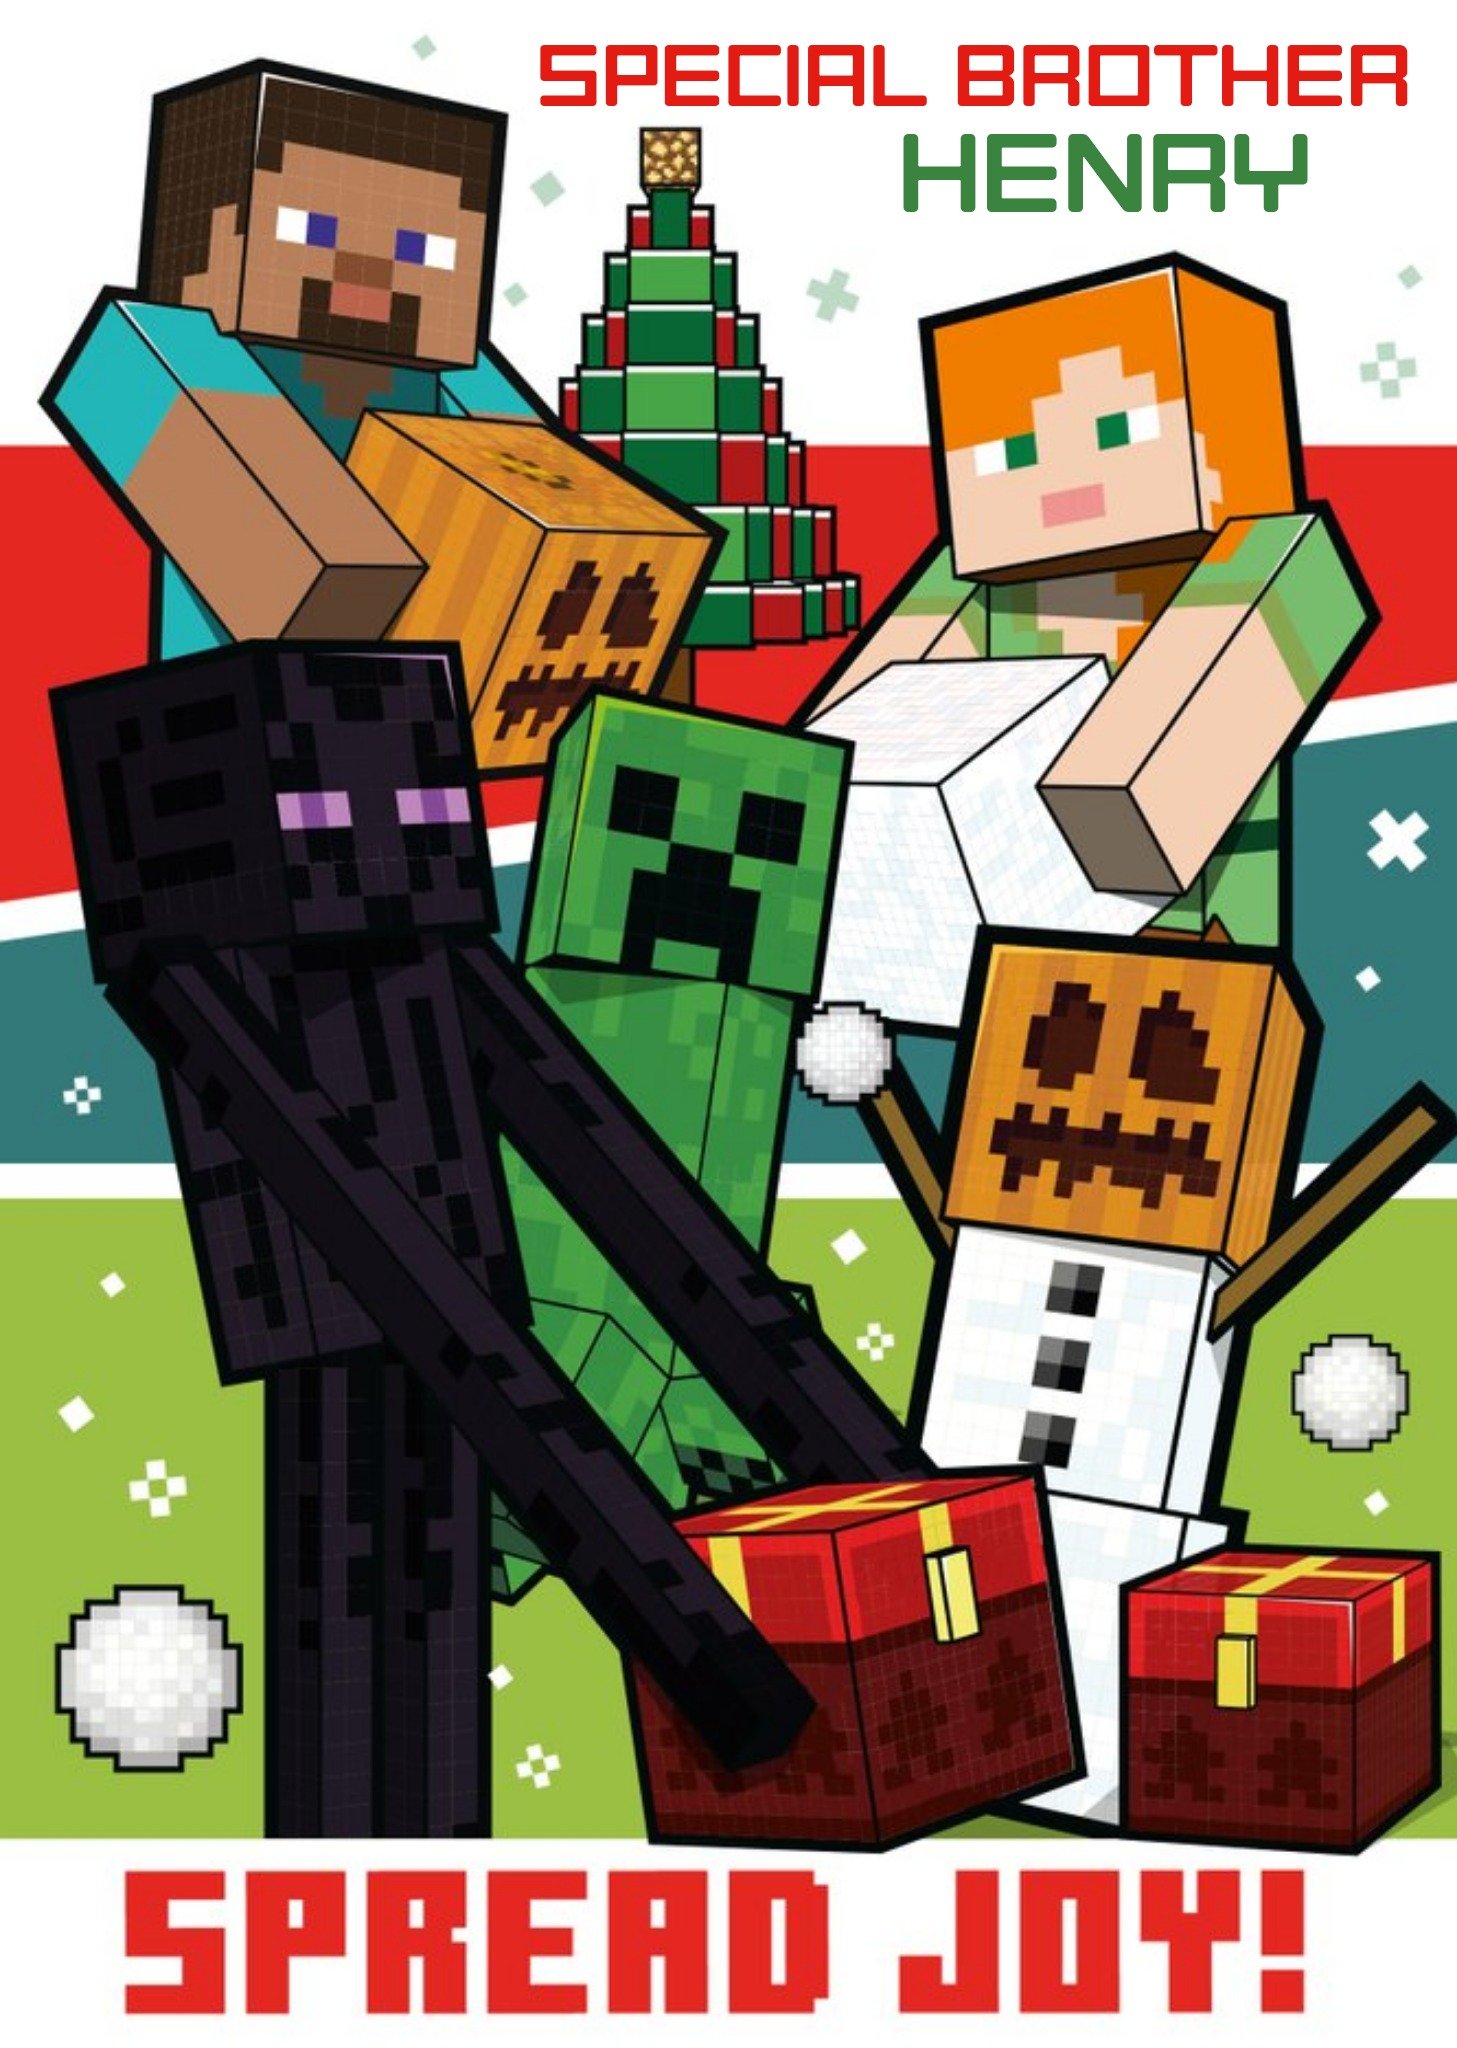 Minecraft Special Brother Spread Joy Christmas Card, Large